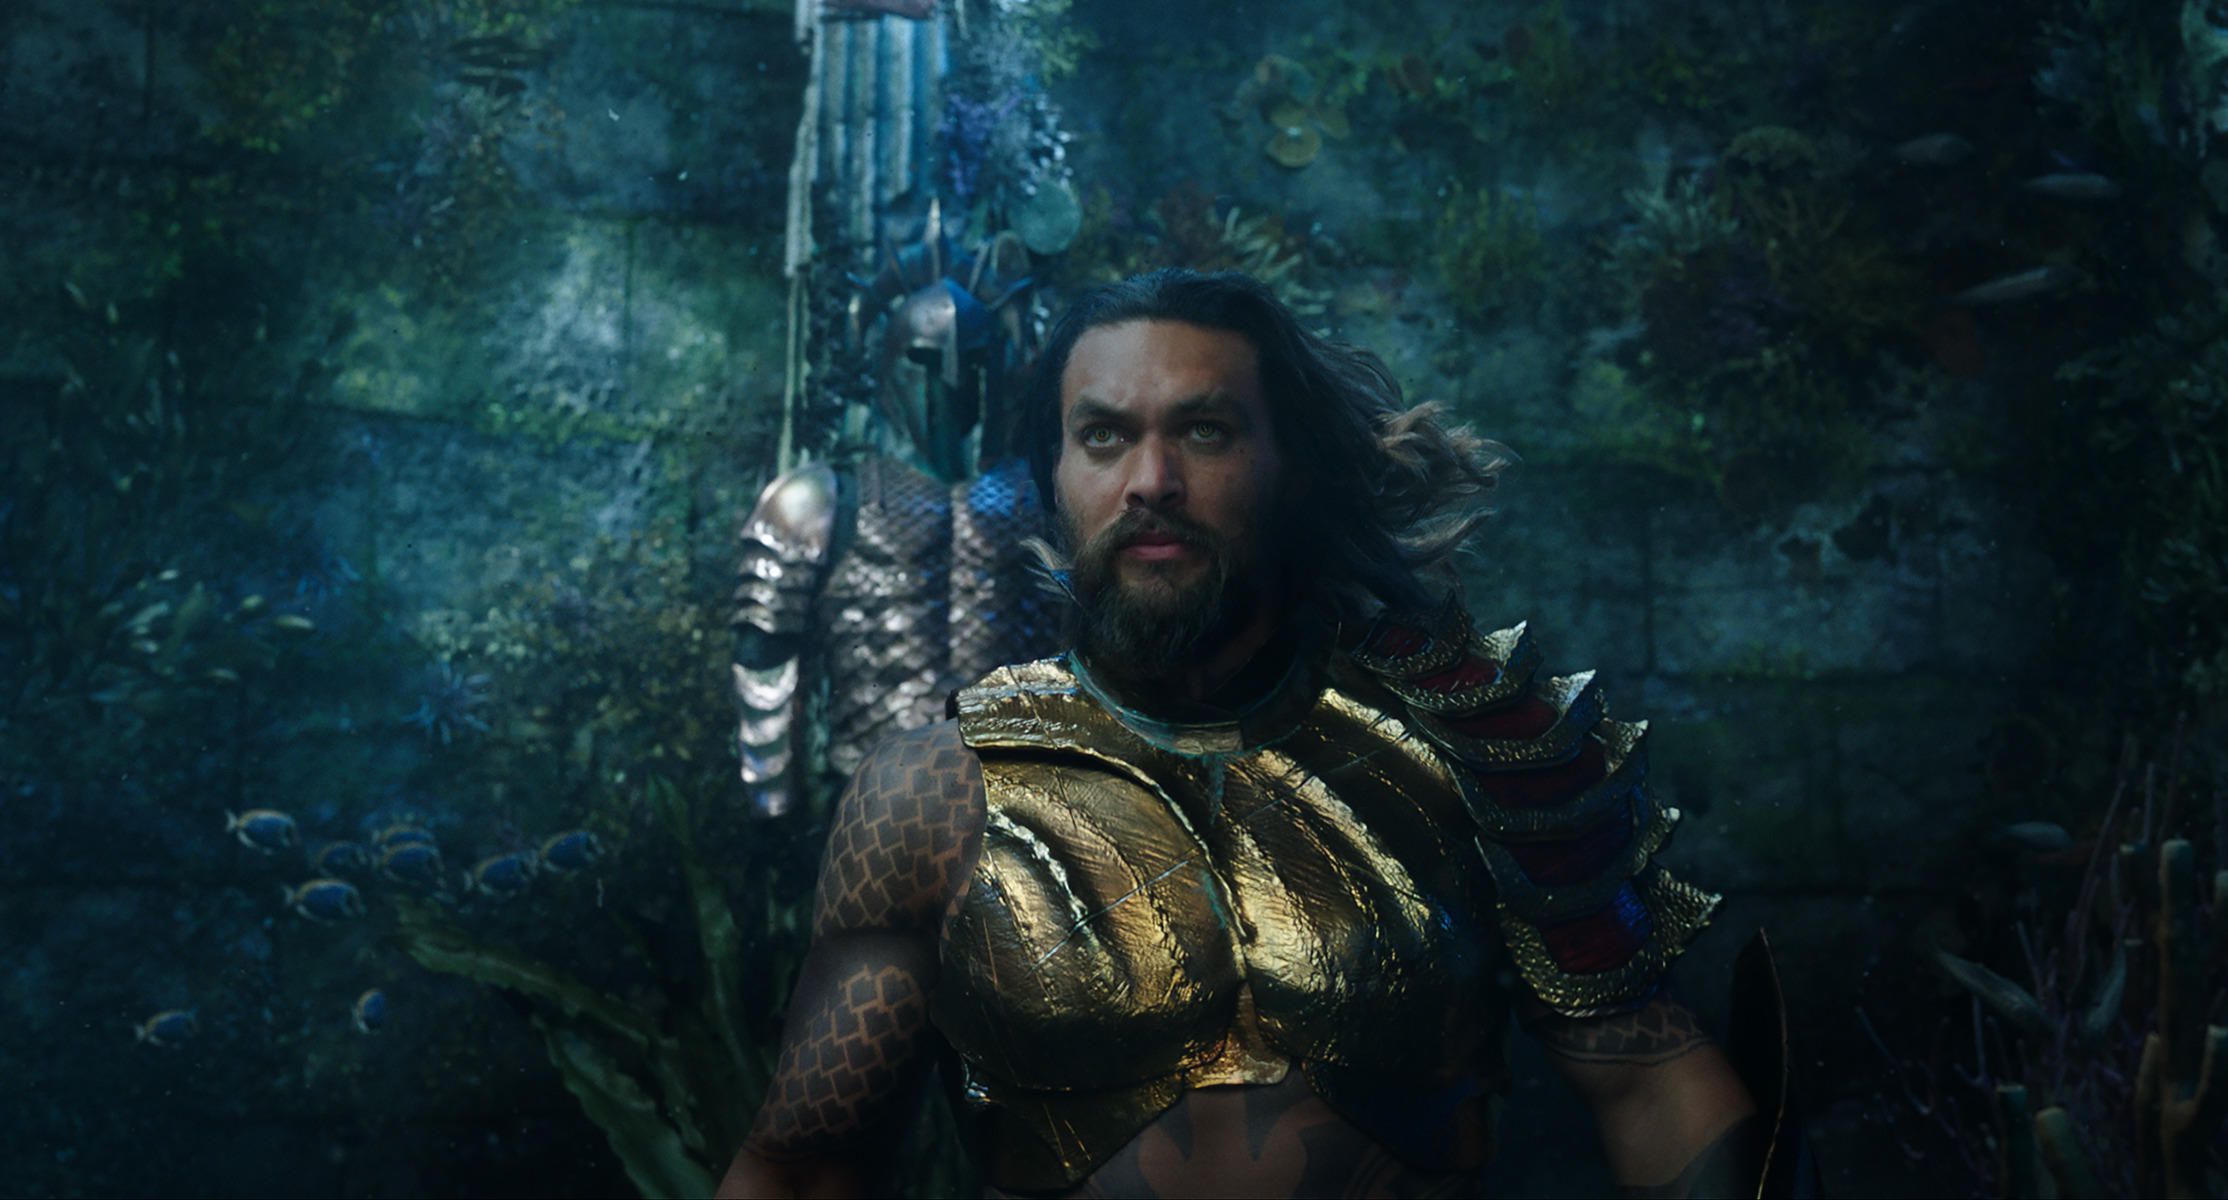 Aquaman: Trailers, release date, cast, plot, rumors and more